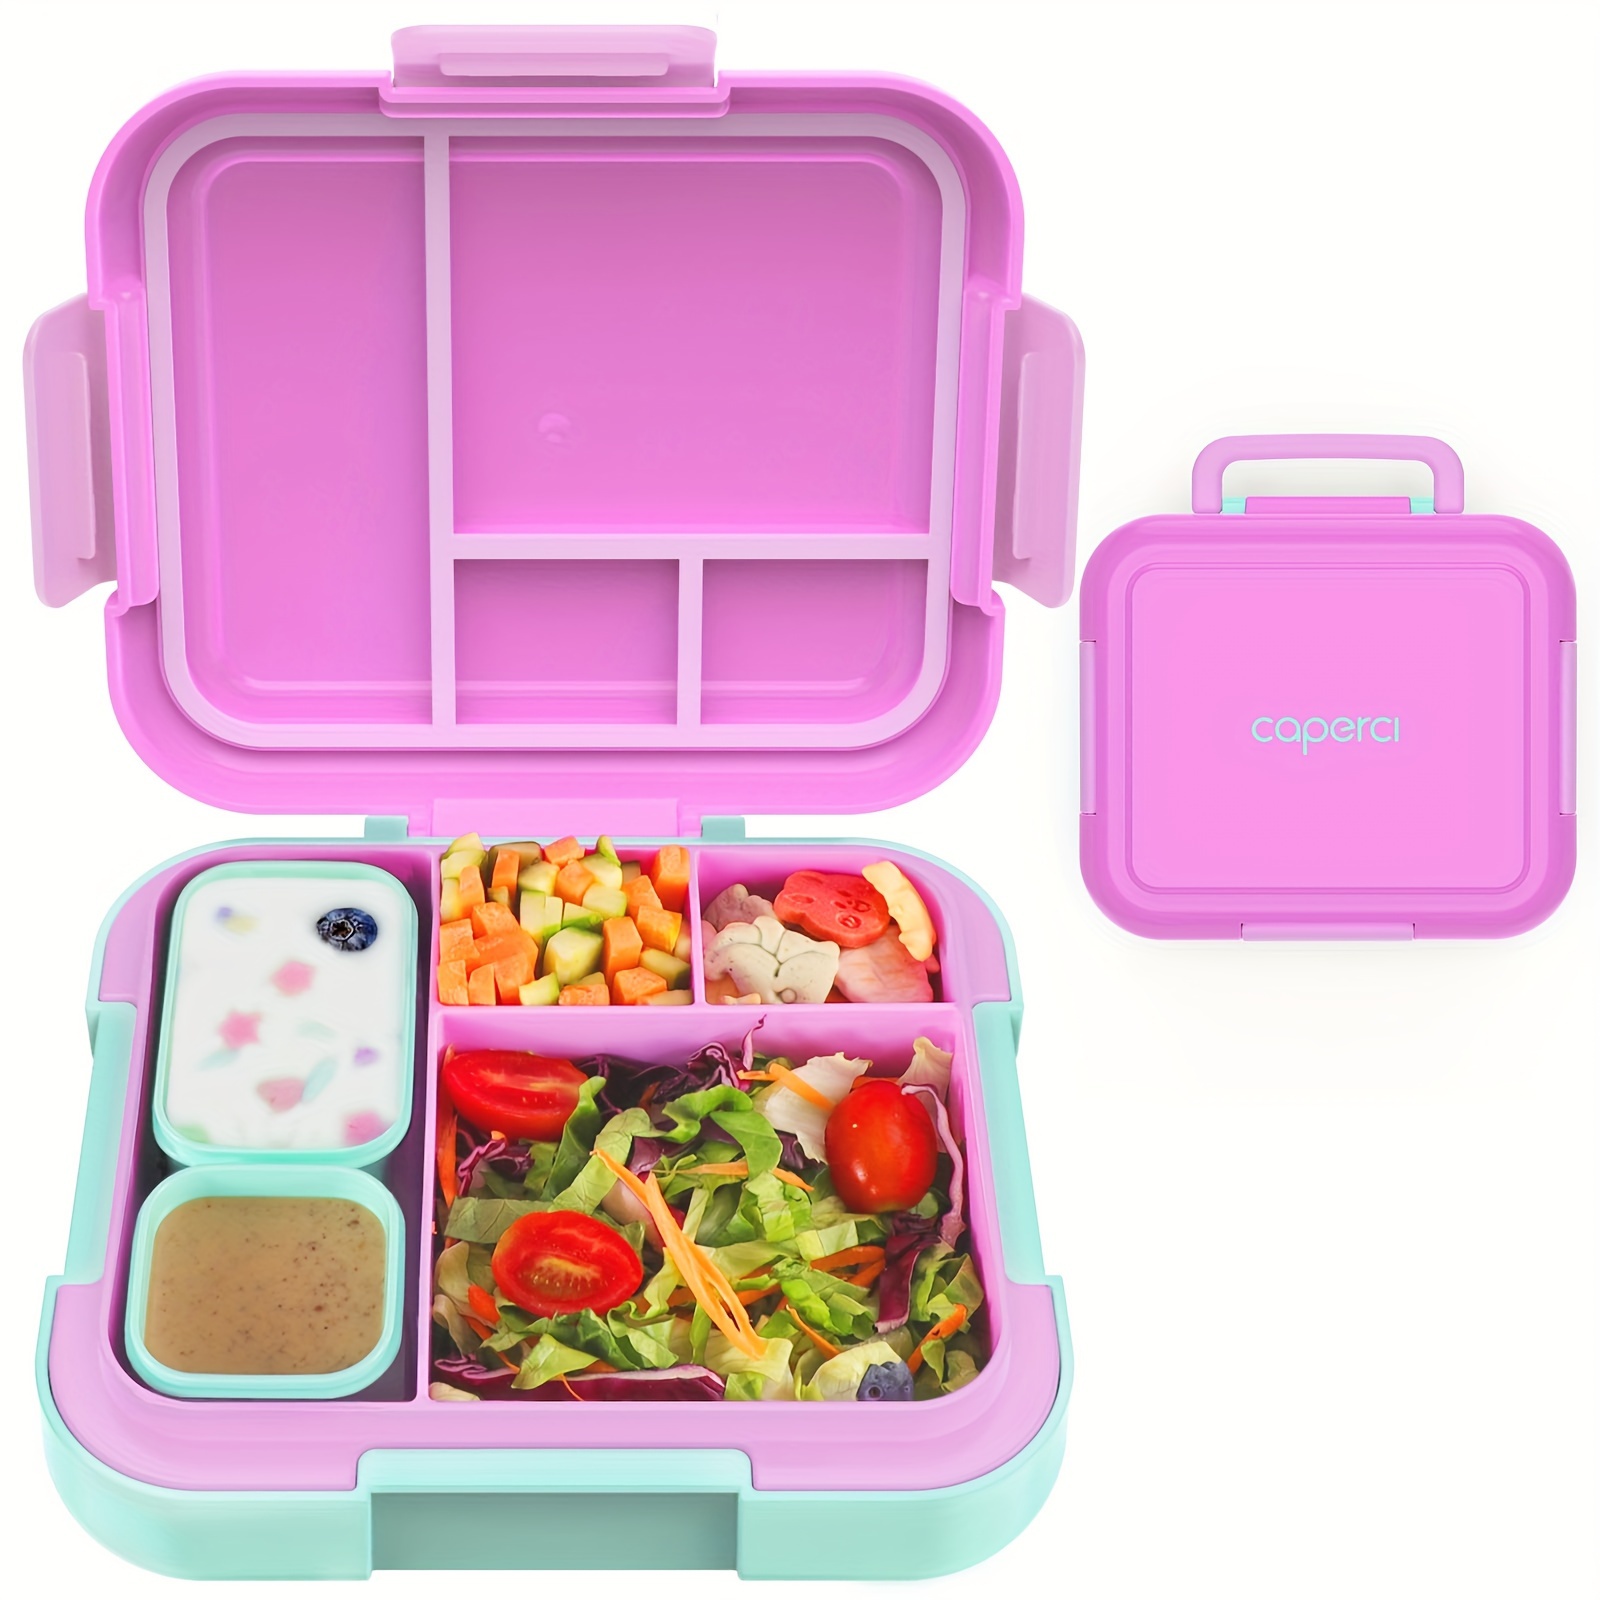 

1pc, Bento Box, Lunch Box With 2 Modular Containers - 4 Compartments, Leak-proof, Portable Handle, Microwave/dishwasher Safe, Bpa-free